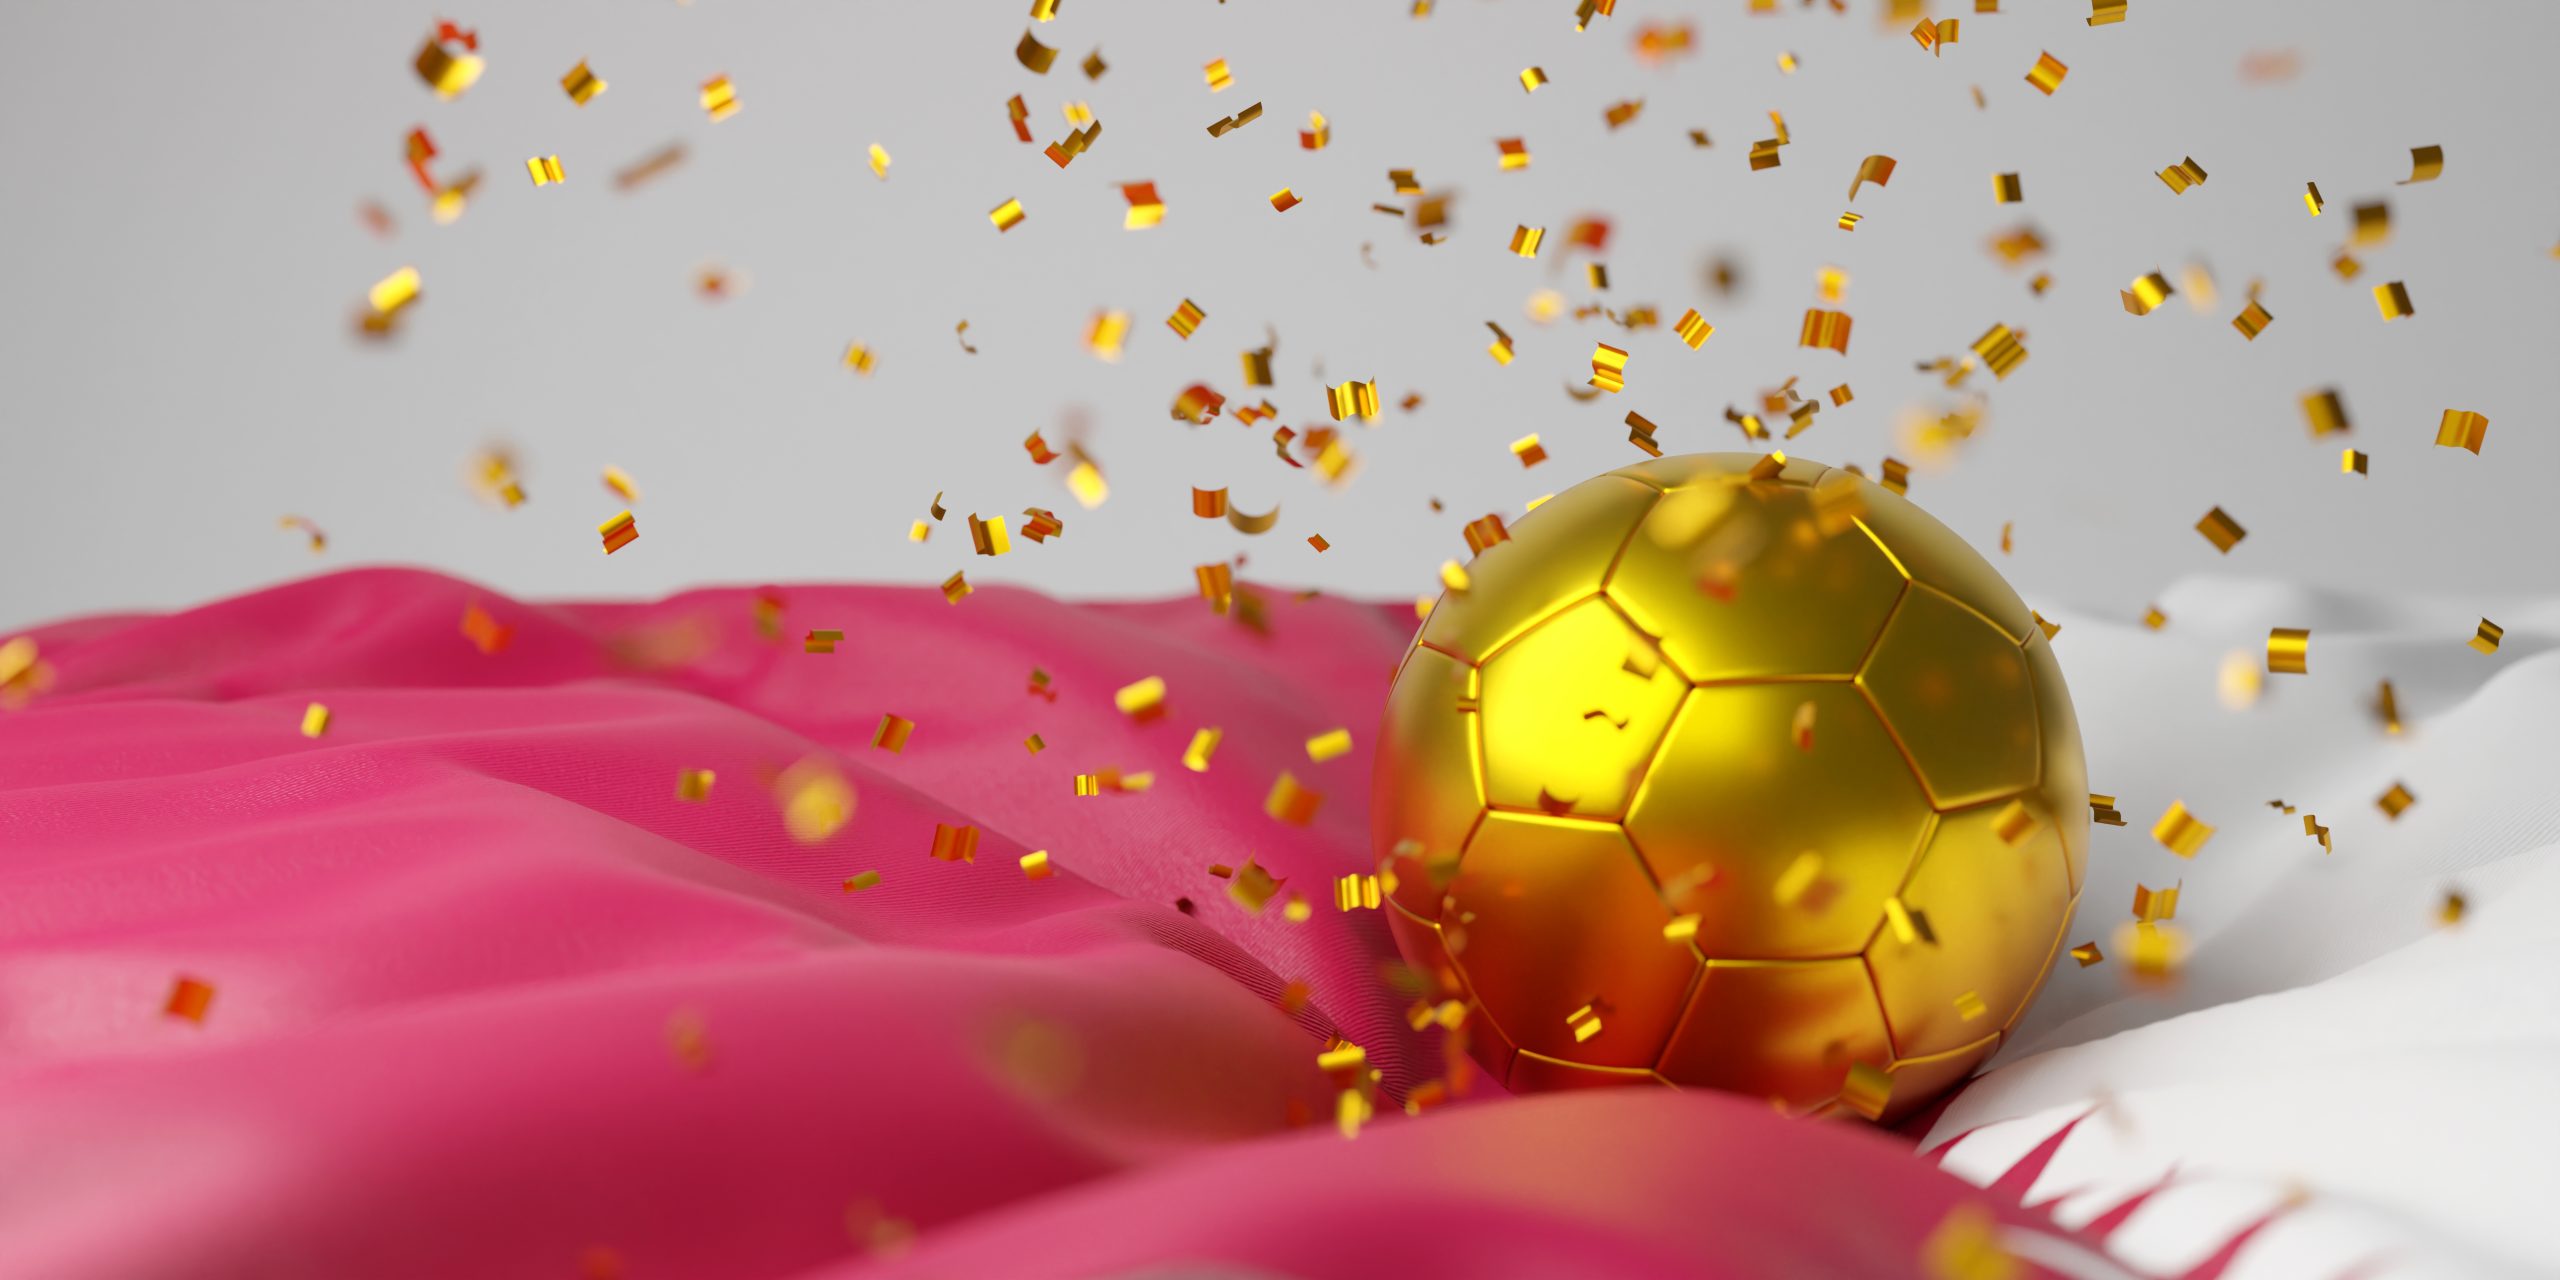 Qatar flag with confetti and golden soccer ball 3d illustration